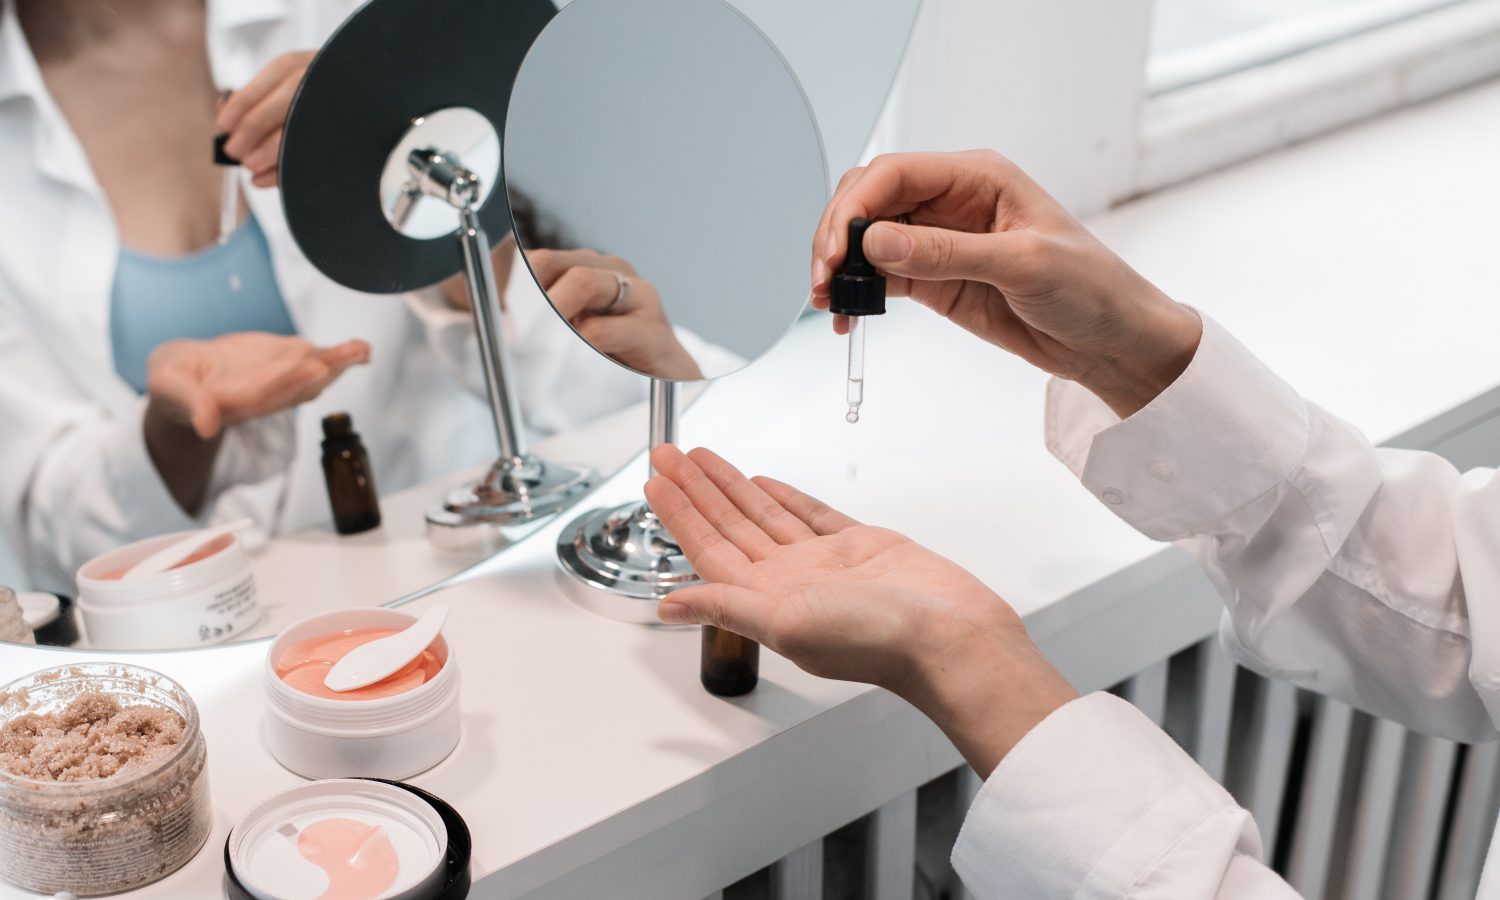 EU Adds CBD To Its List Of Legal Cosmetic Ingredients